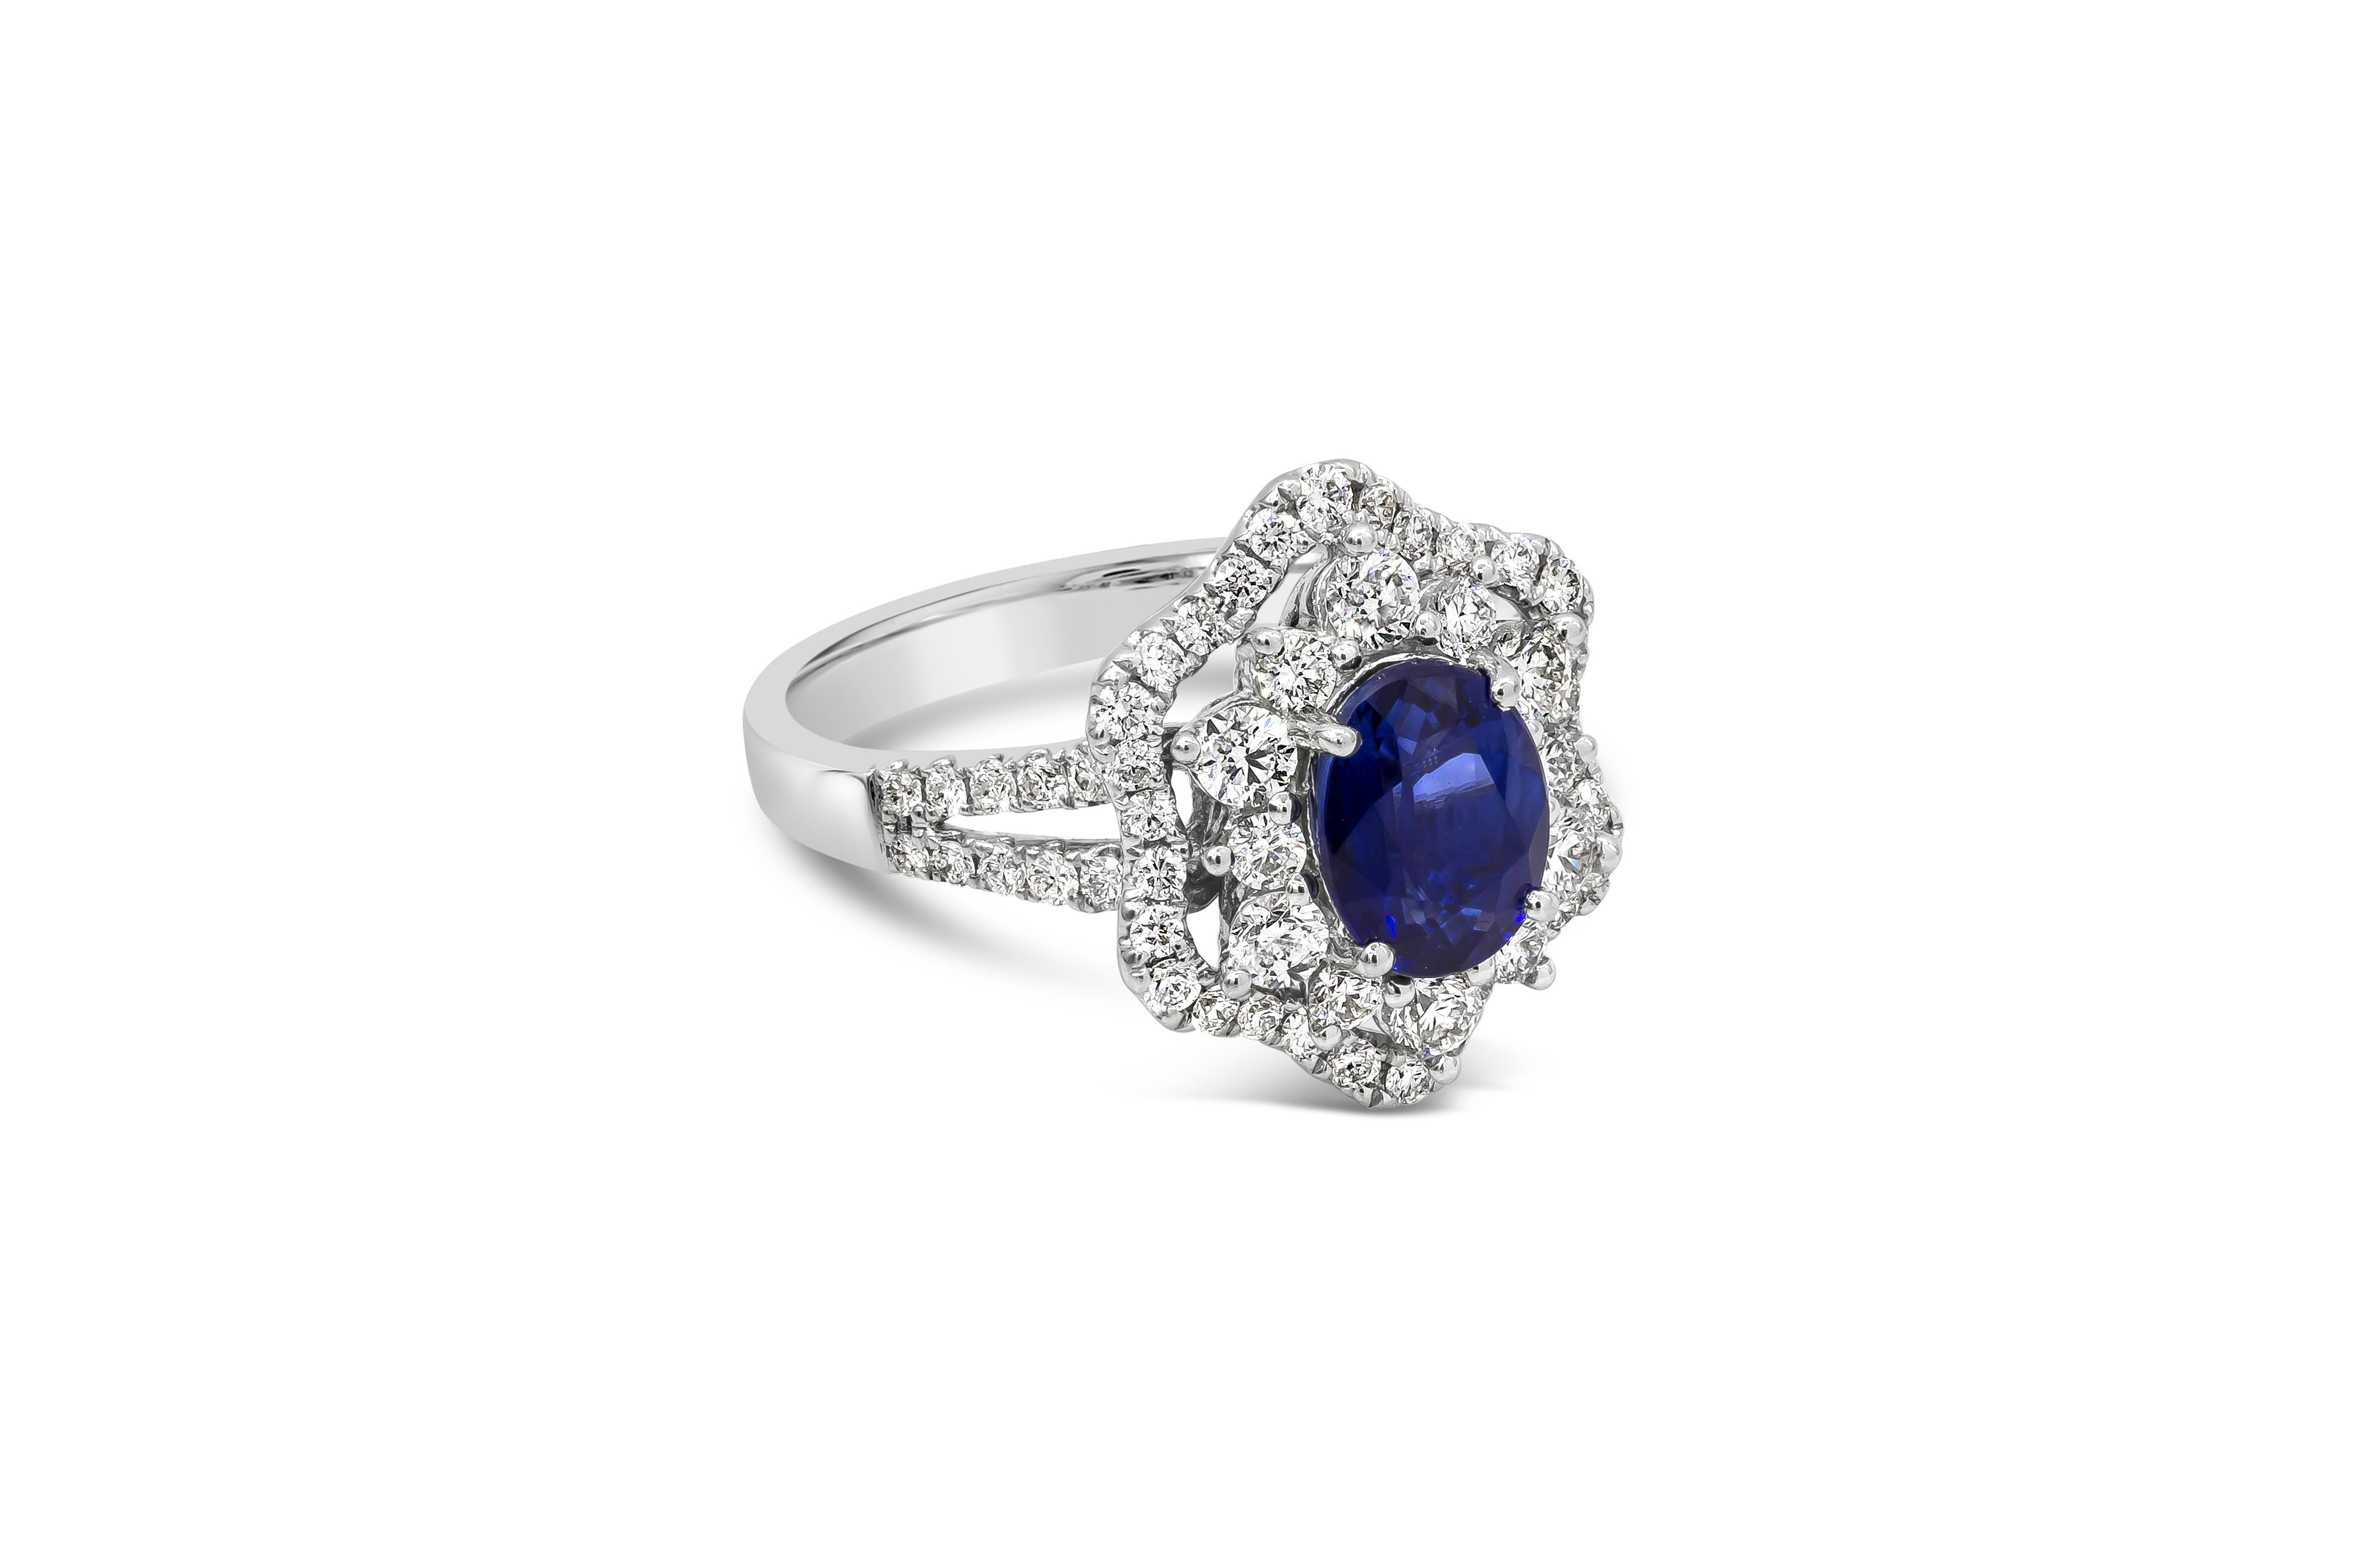 A unique flower halo engagement ring showcasing a 1.75 carat oval cut color-rich sapphire, surrounded by round brilliant diamonds in a open-work floral motif. Set in an 18k White Gold mounting accented by 62 brilliant round diamonds weighing 1.01